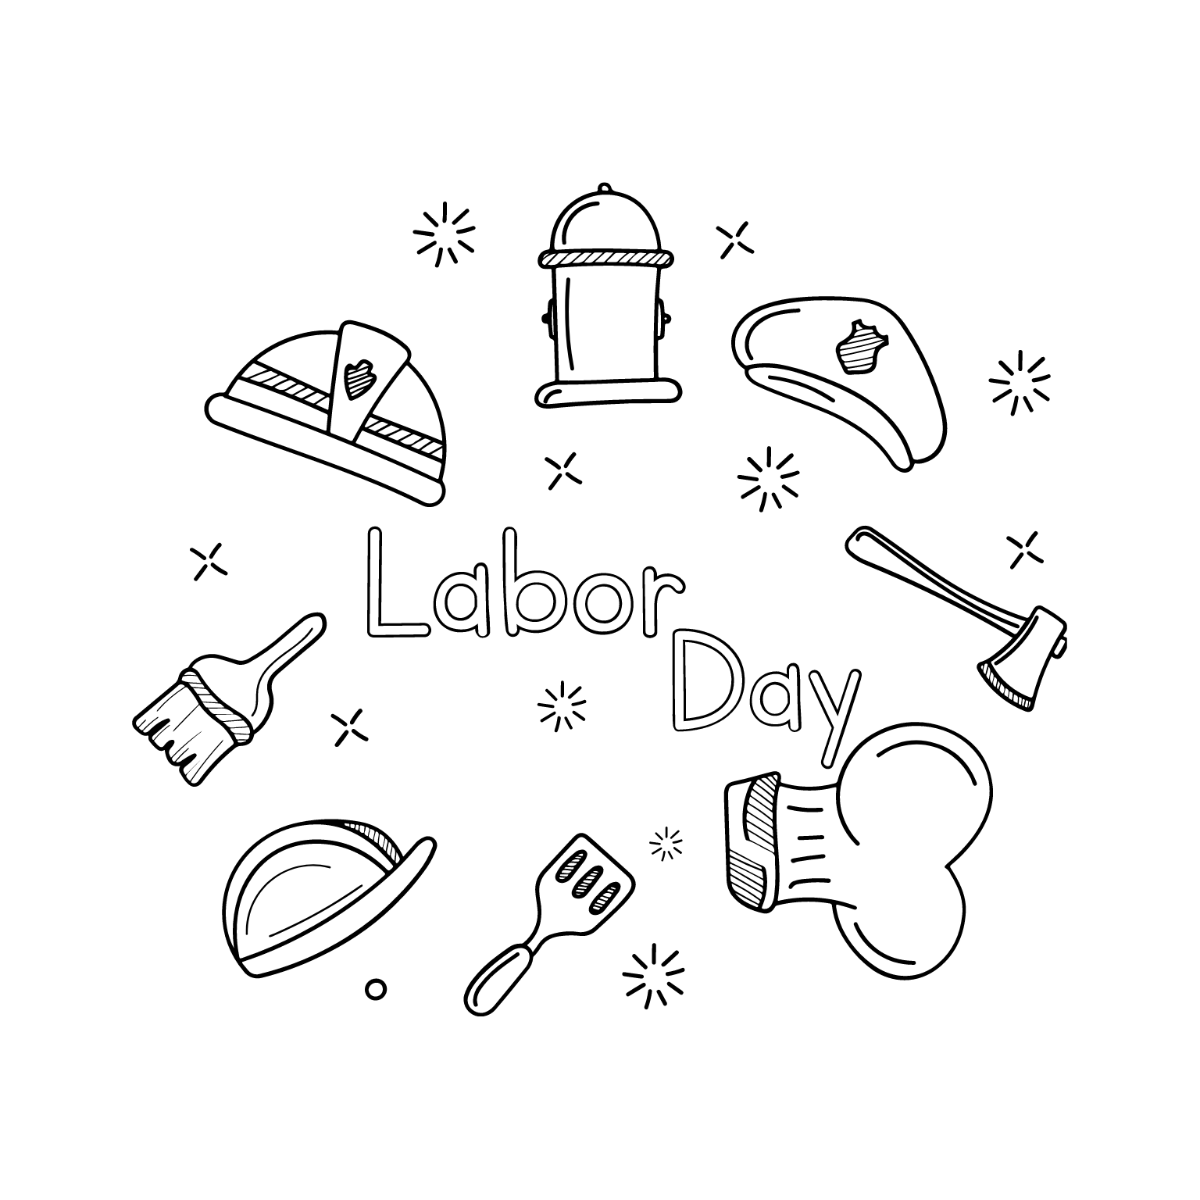 Child Labor Day Concept in Line Art Drawing Sketch Illustration. Poor Vs  Rich Kid Concept Stock Vector - Illustration of rich, labour: 230772990